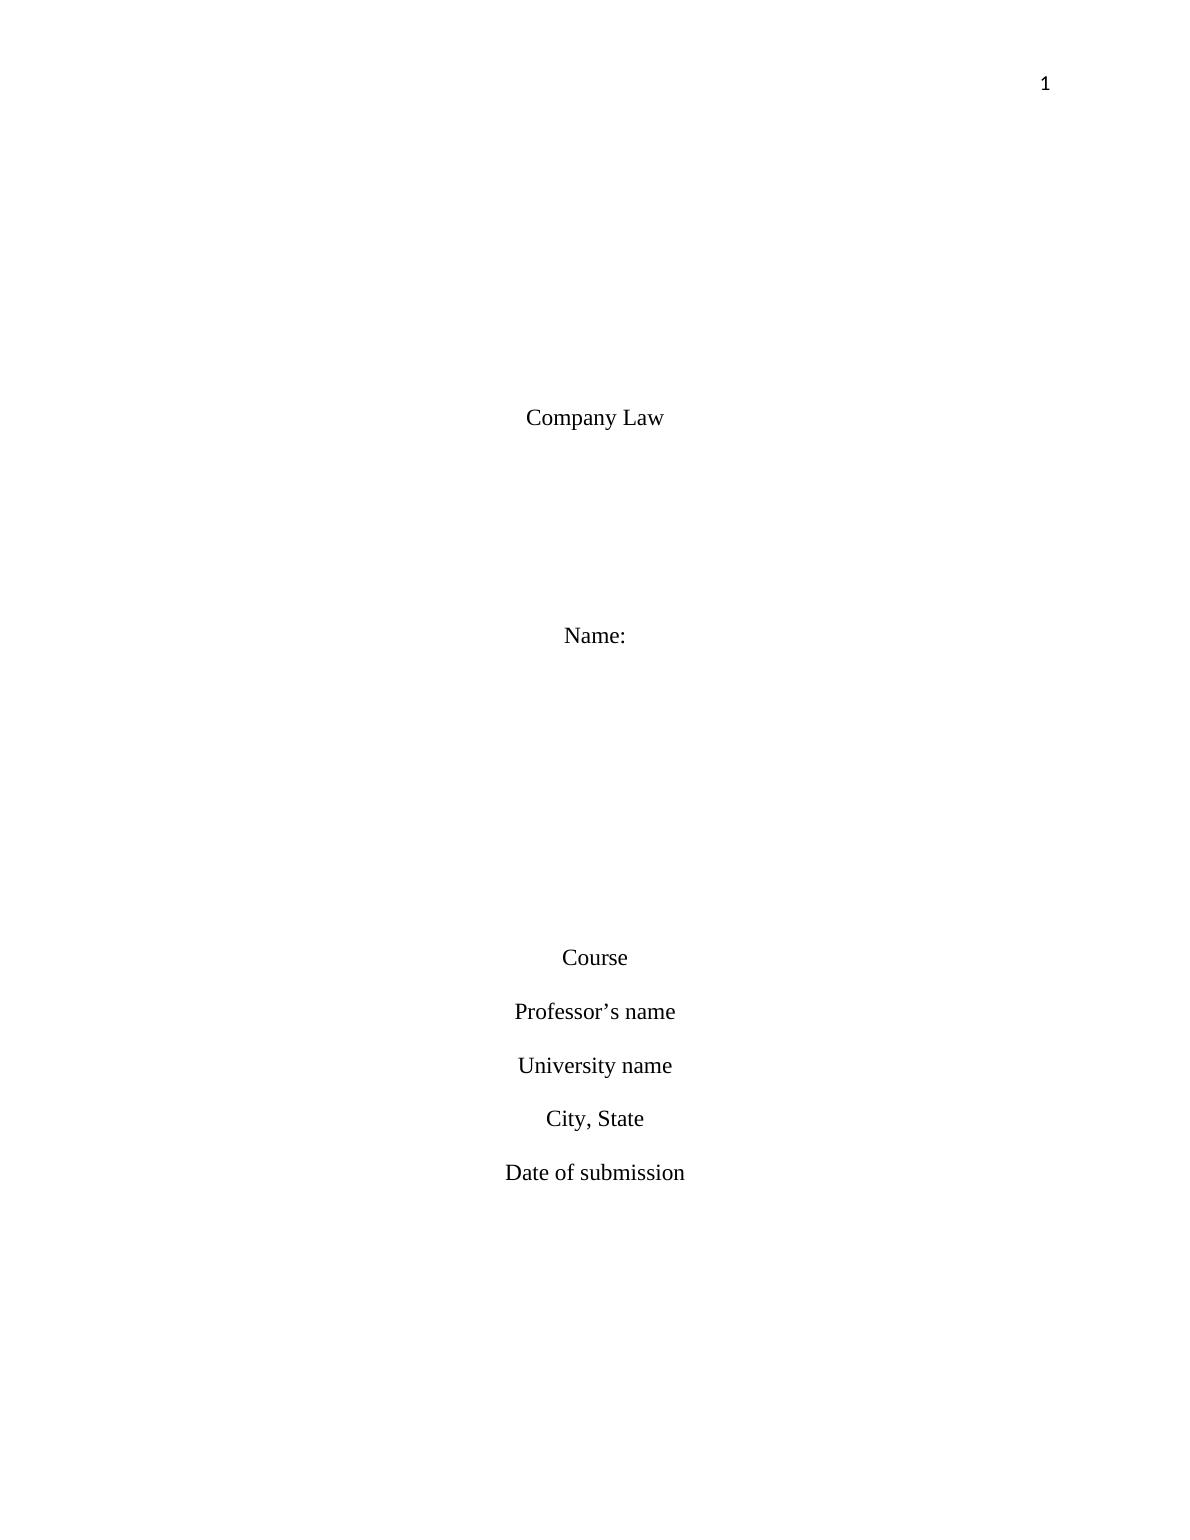 Assignment on Company Law (docs)_1